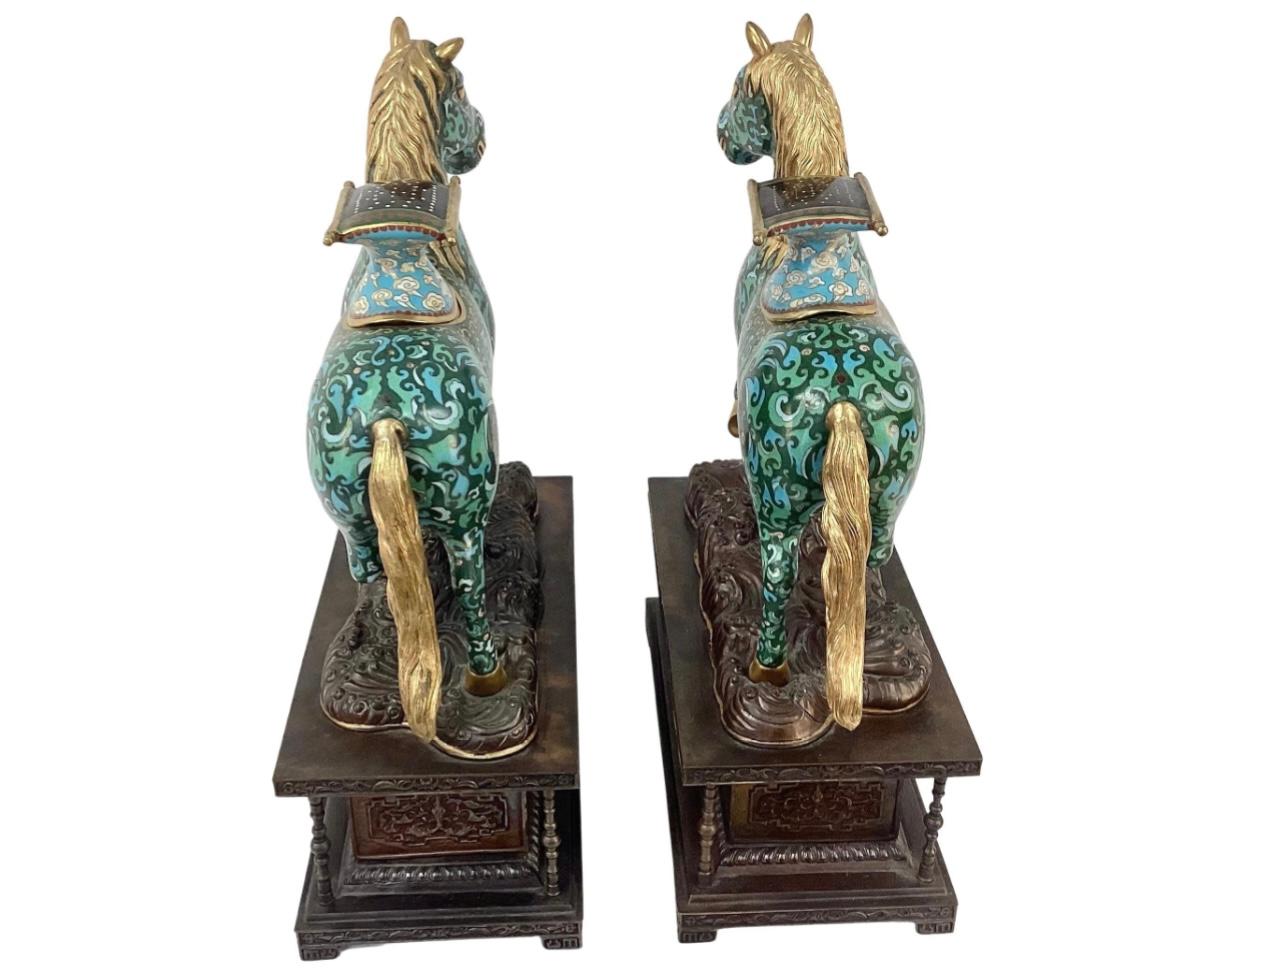 Chinese Export Pair Chinese Cloisonné Enamel Caparison Horse-Form Censers on Metal Bases